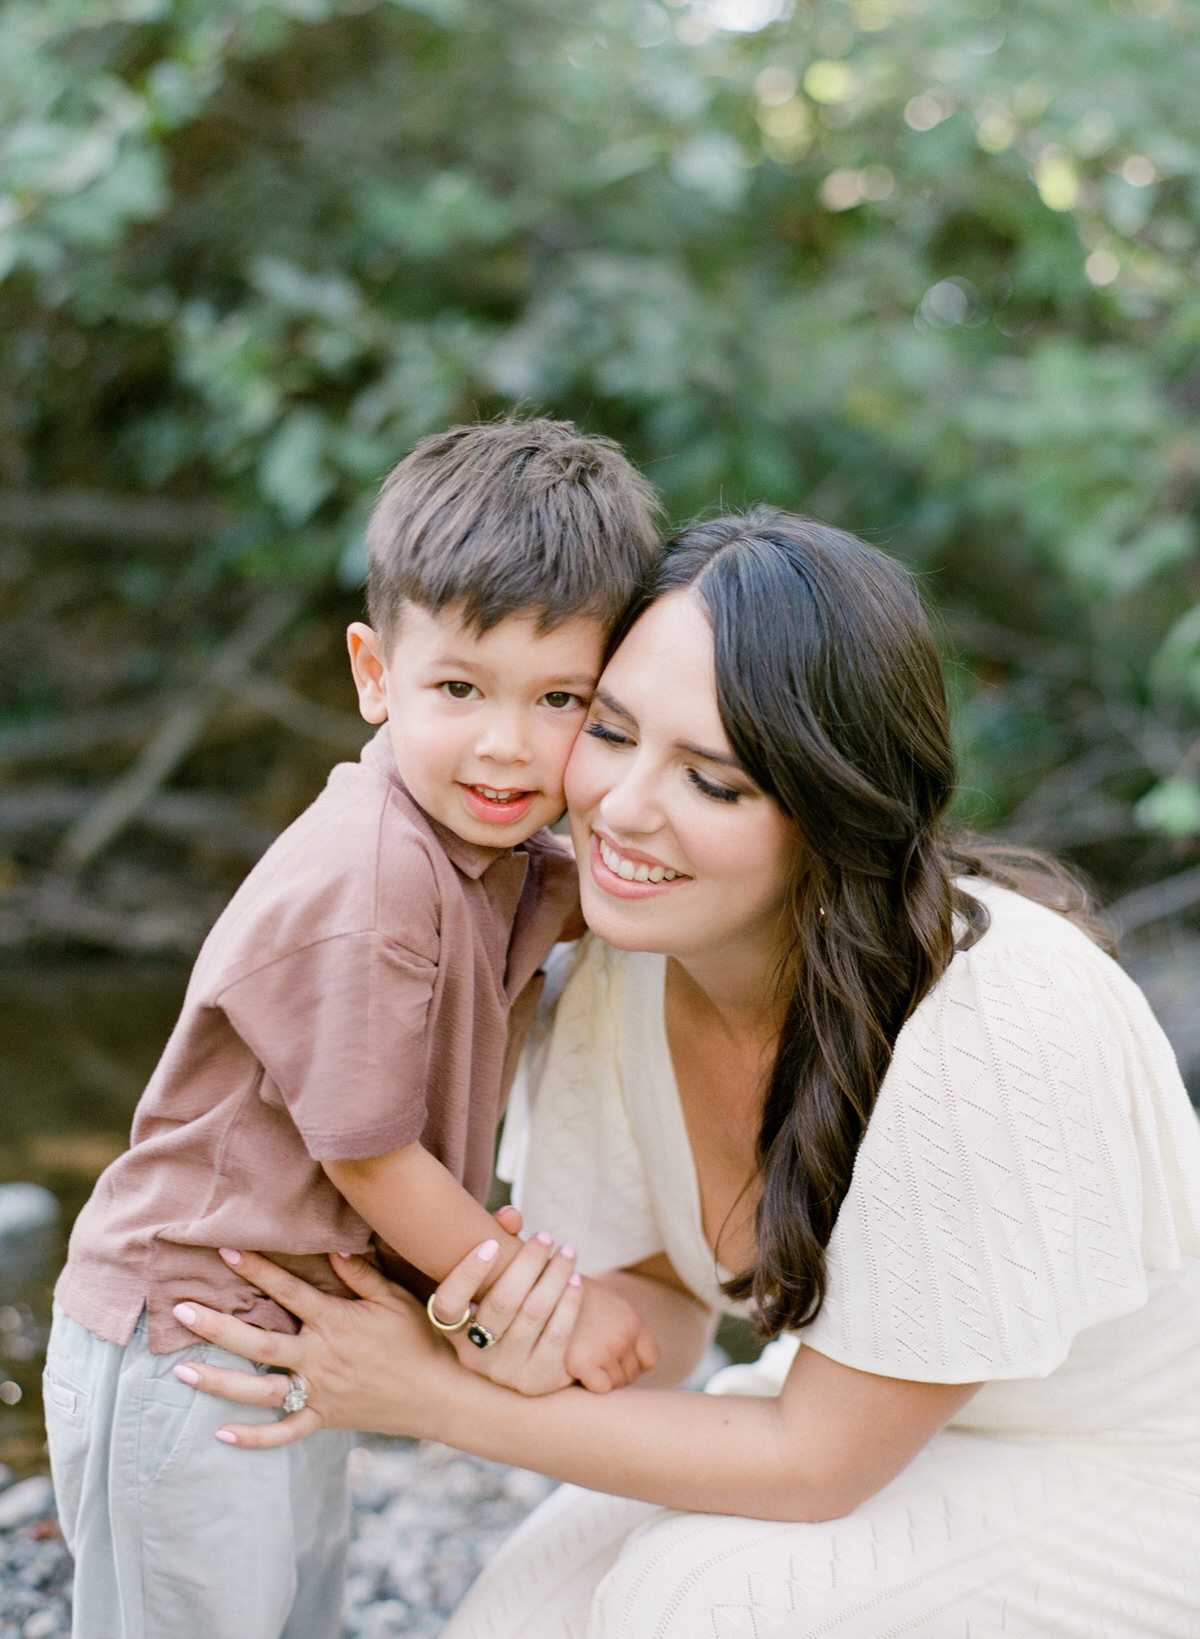 Light and airy family photography - Charlotte Family Photography on Film - Charlotte Family Photography - Charlotte Family Photographer - Luxury Family Photography - Family Pictures on Film - San Francisco Bay Area Family Session on Film - Kent Avenue Photography - www.kentavenuephotography.com